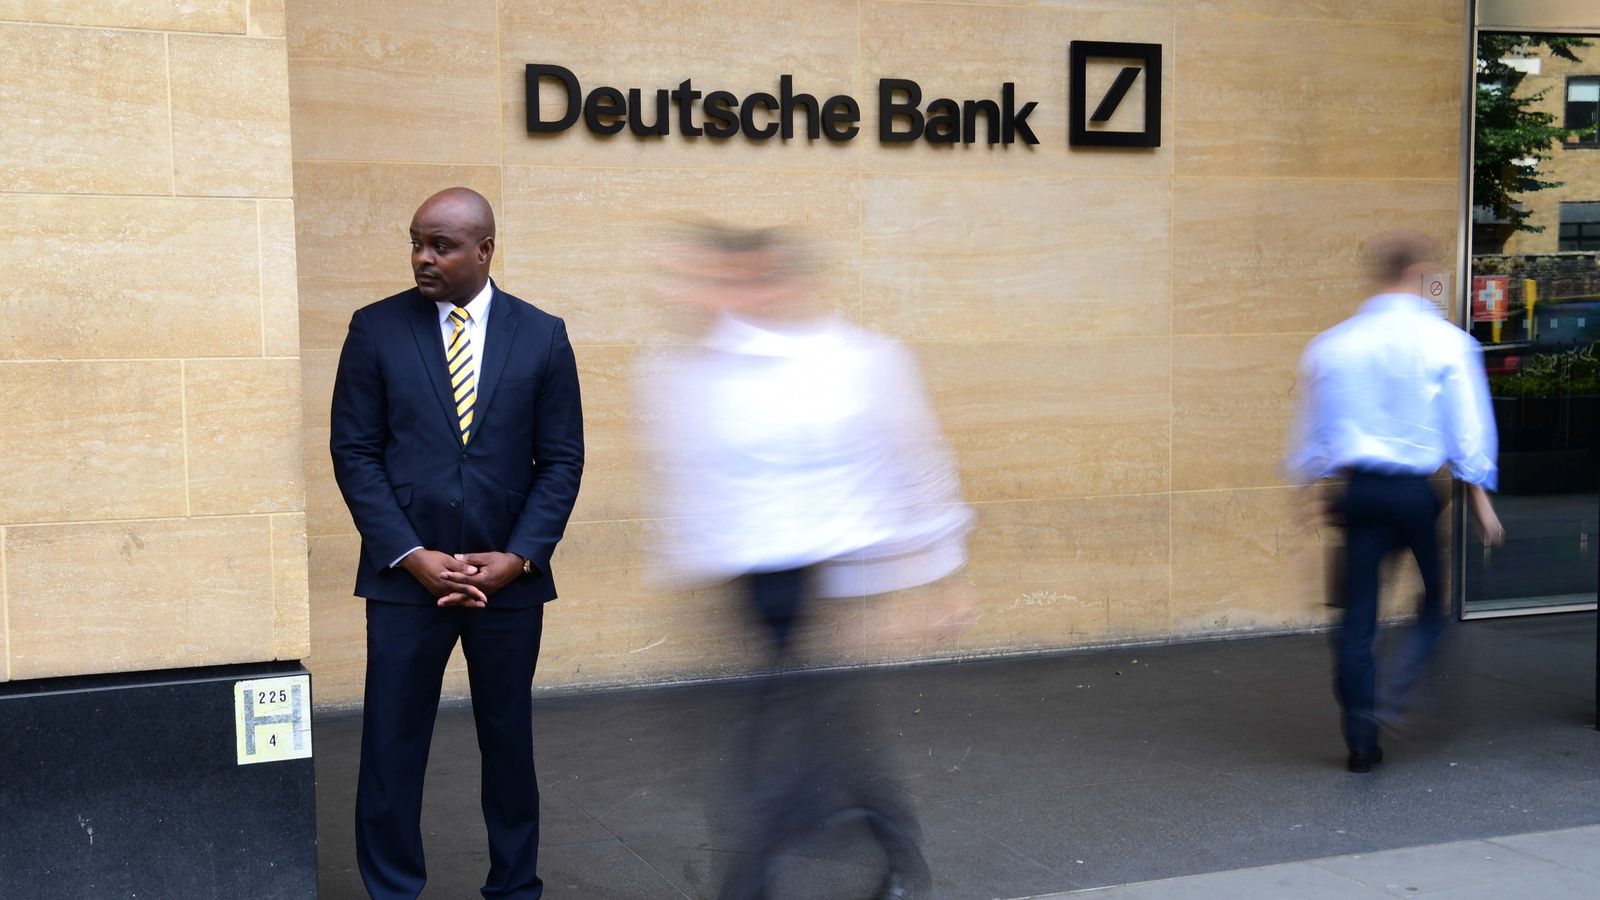 Deutsche Bank heads new rout for banking stocks on financial markets